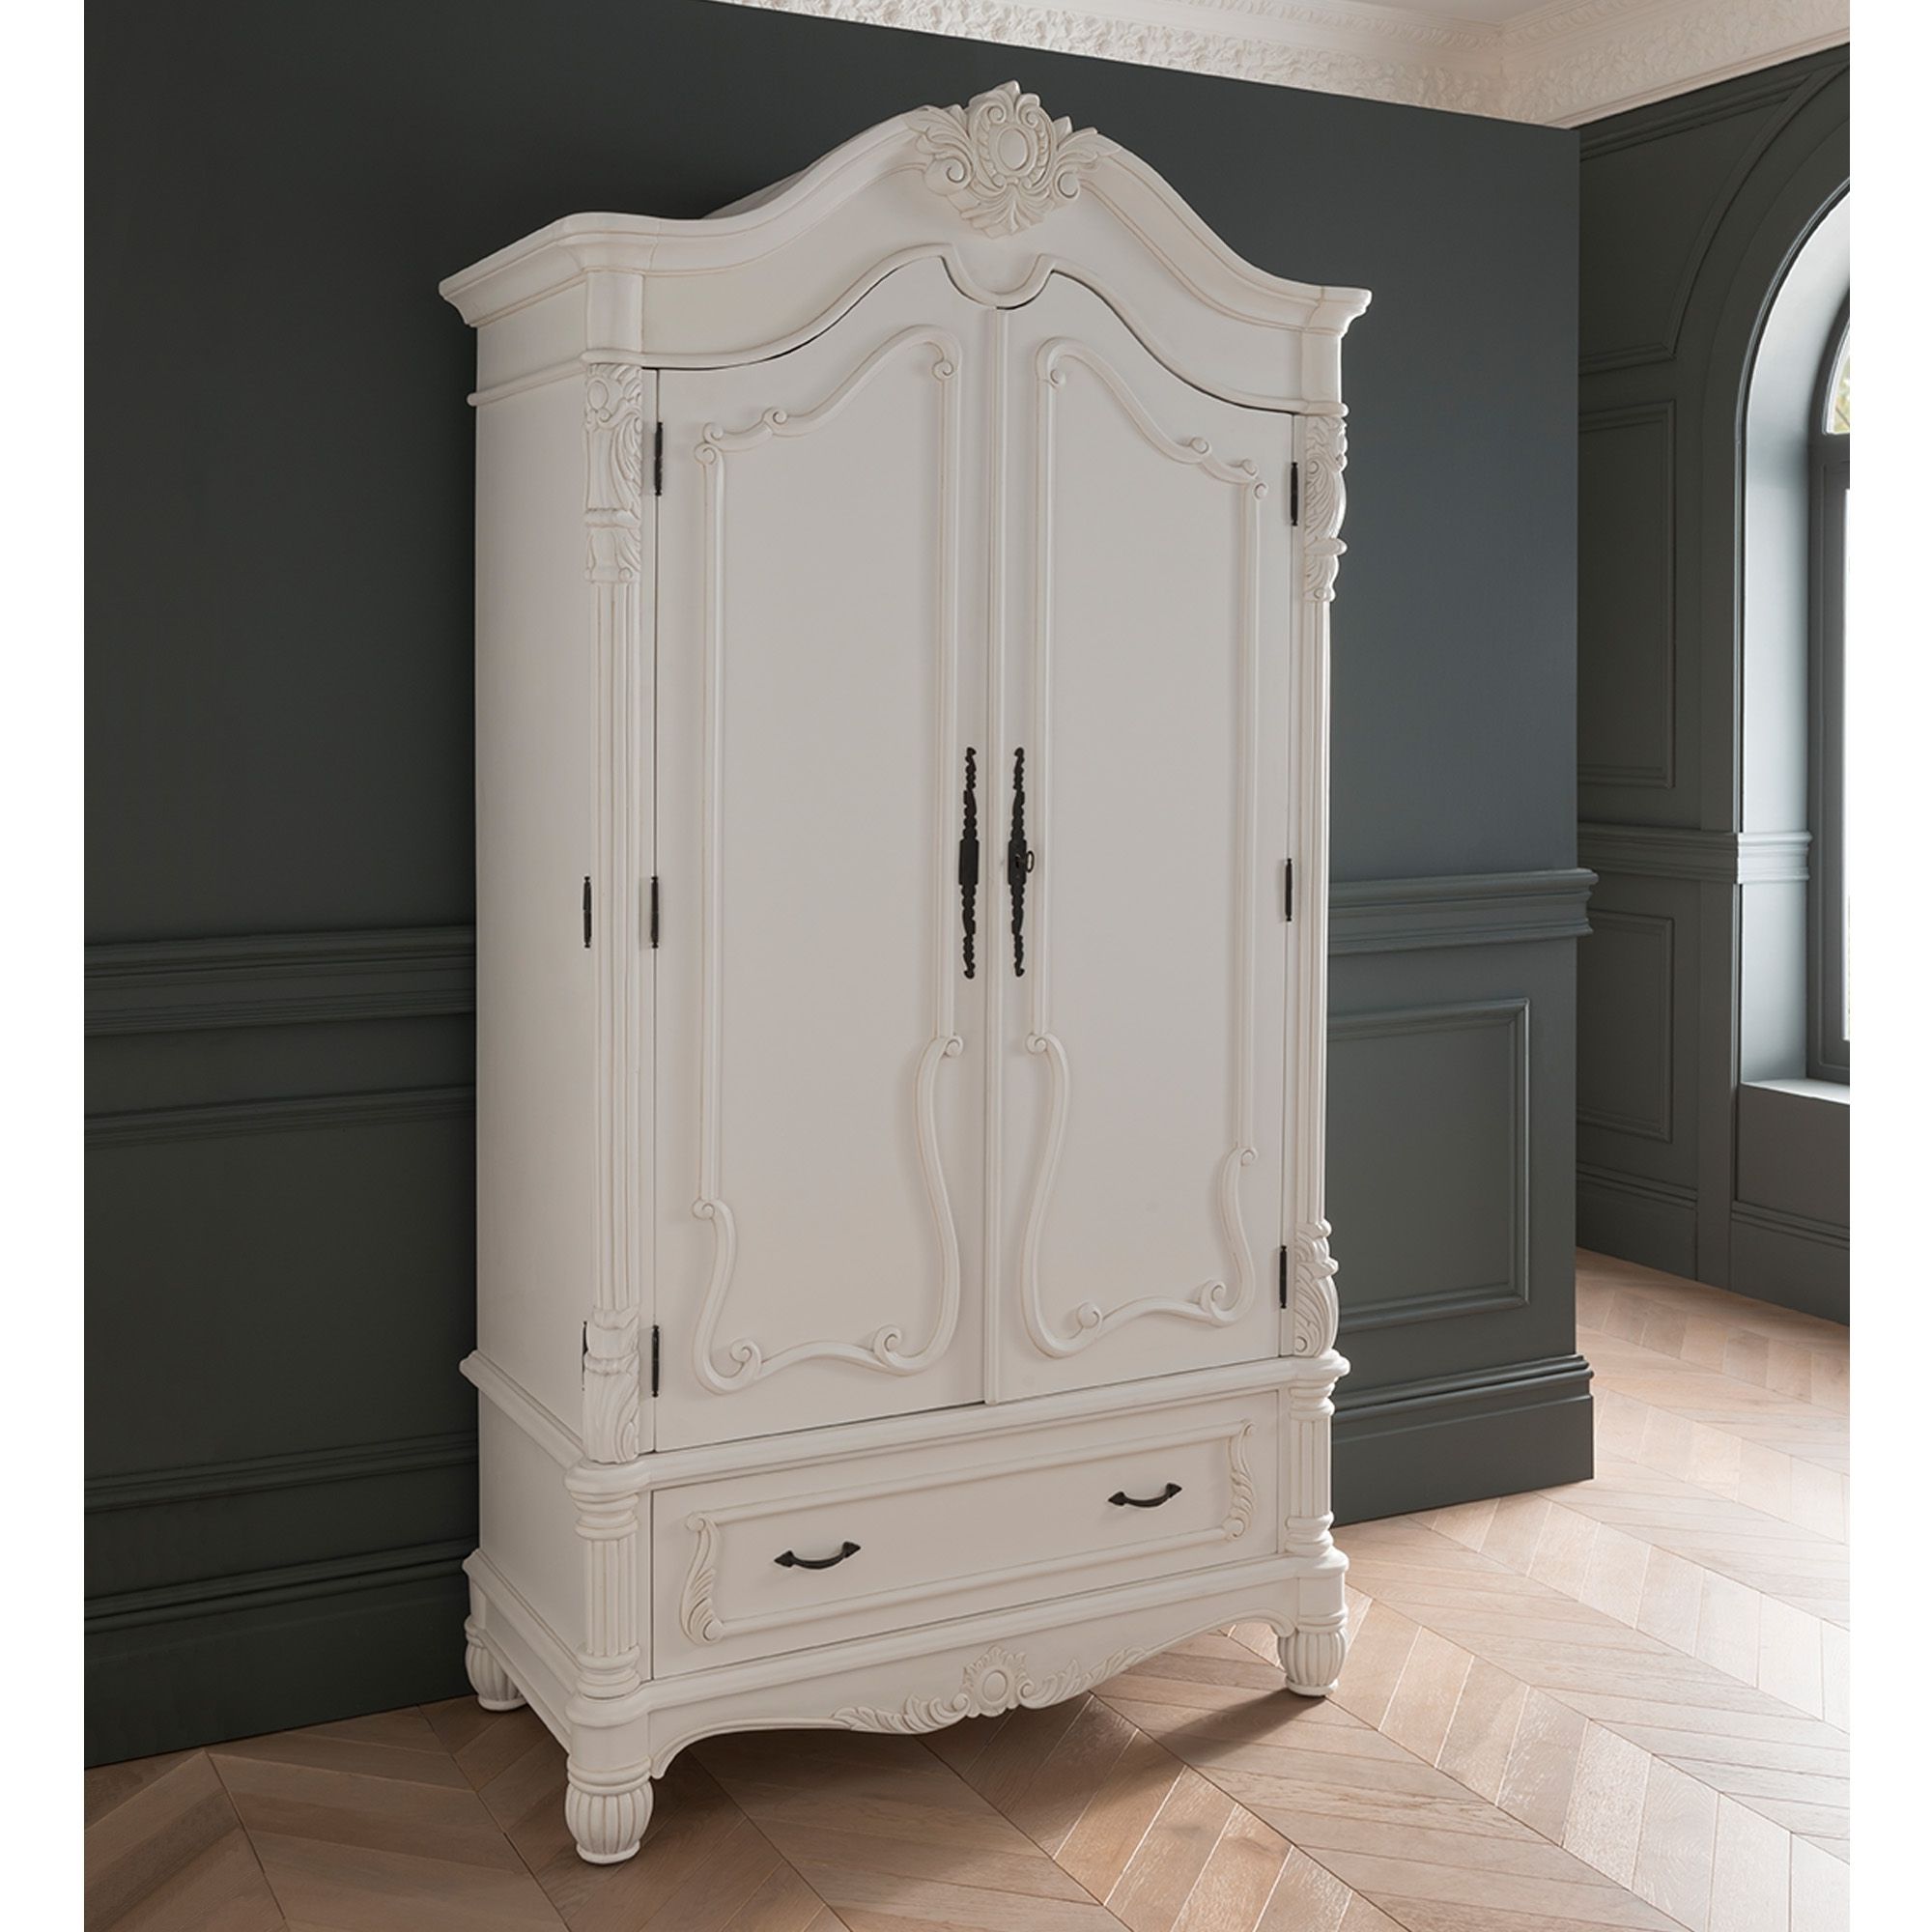 Antique French Style White Finished 1 Drawer Wardrobe | Homesdirect365 With Regard To Antique White Wardrobes (Gallery 1 of 20)